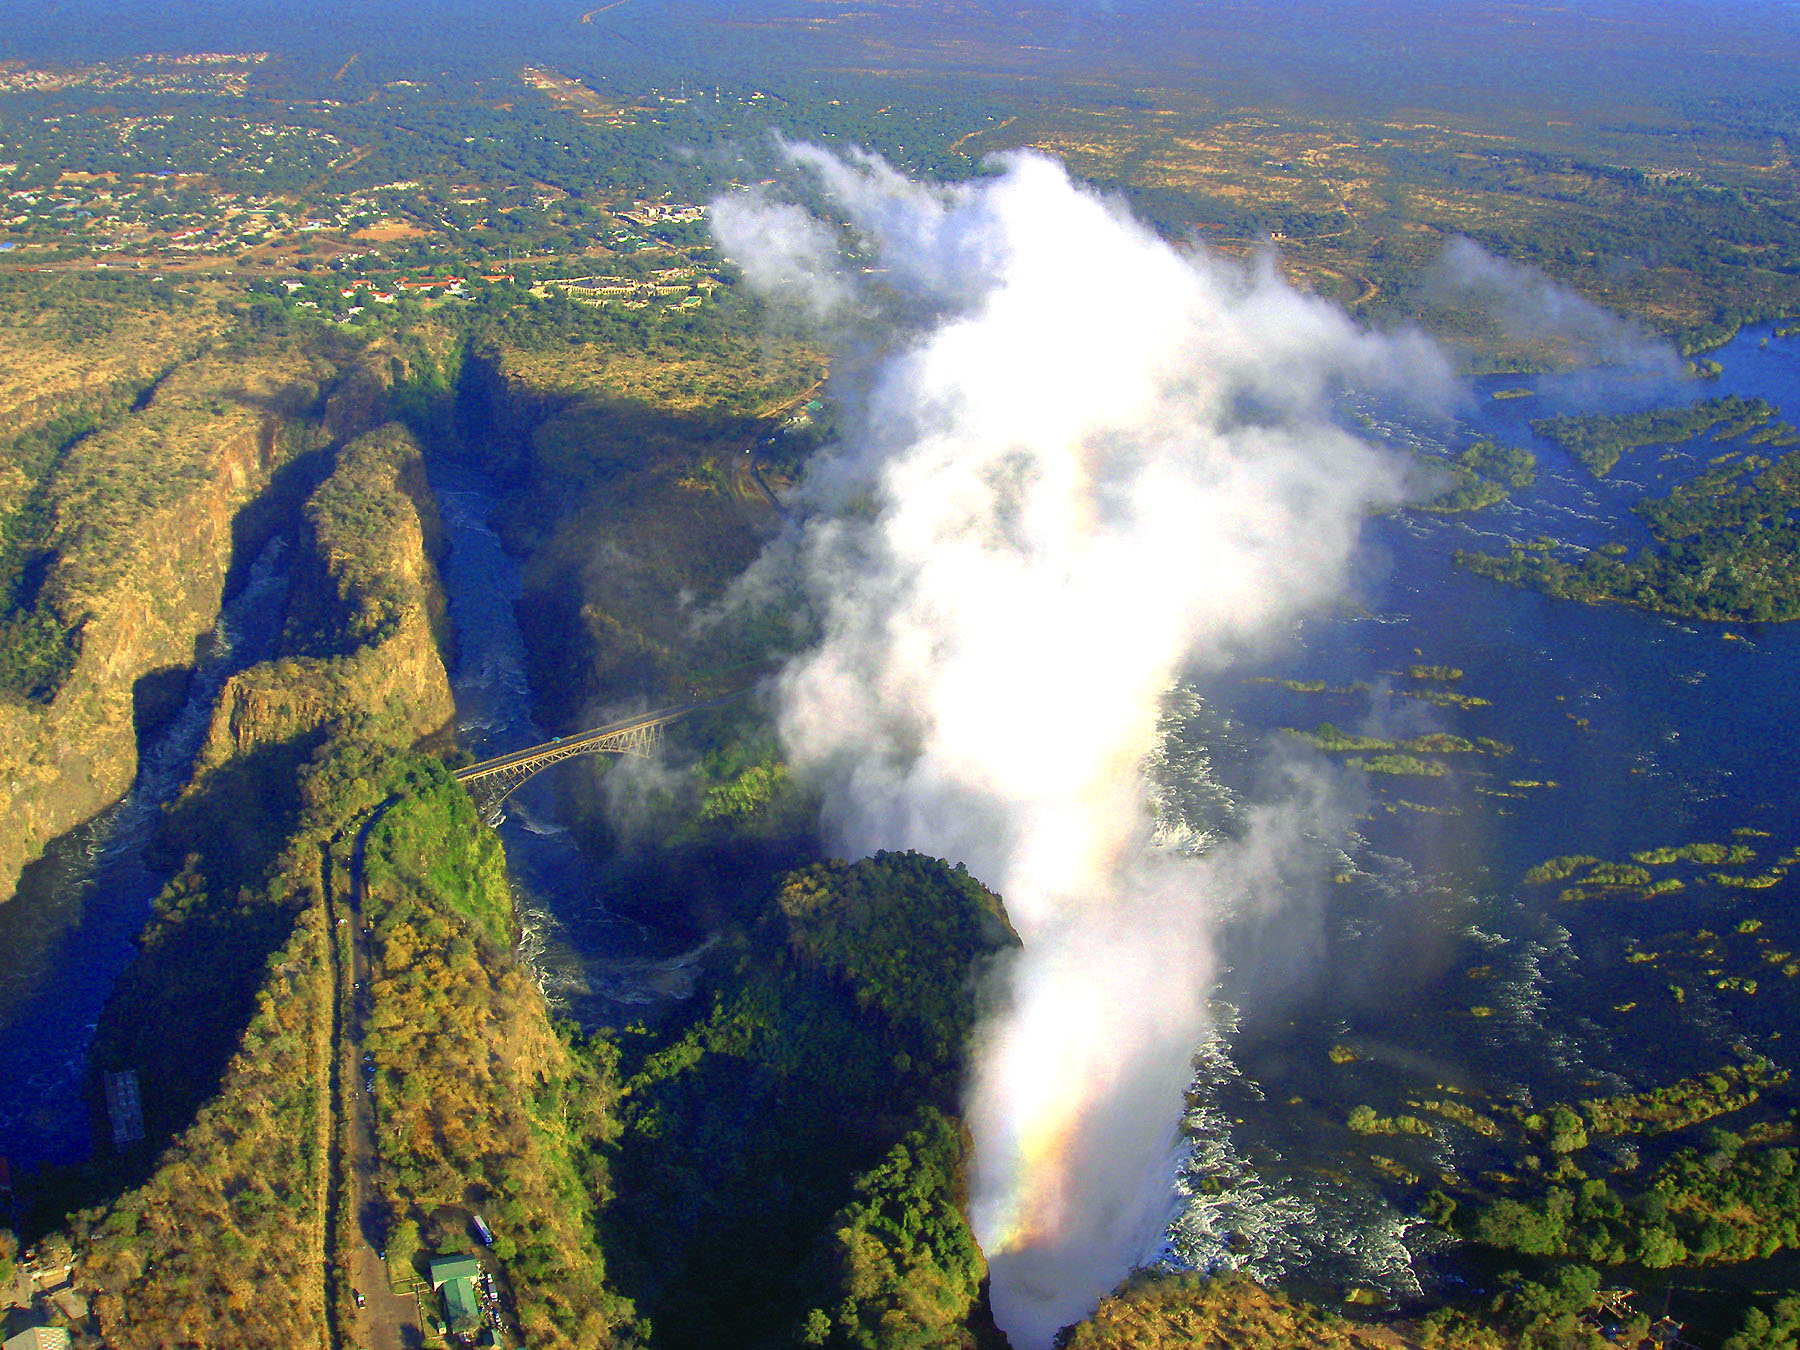 VT - 2004 - A10 - Victoria Falls Helicopter View 4